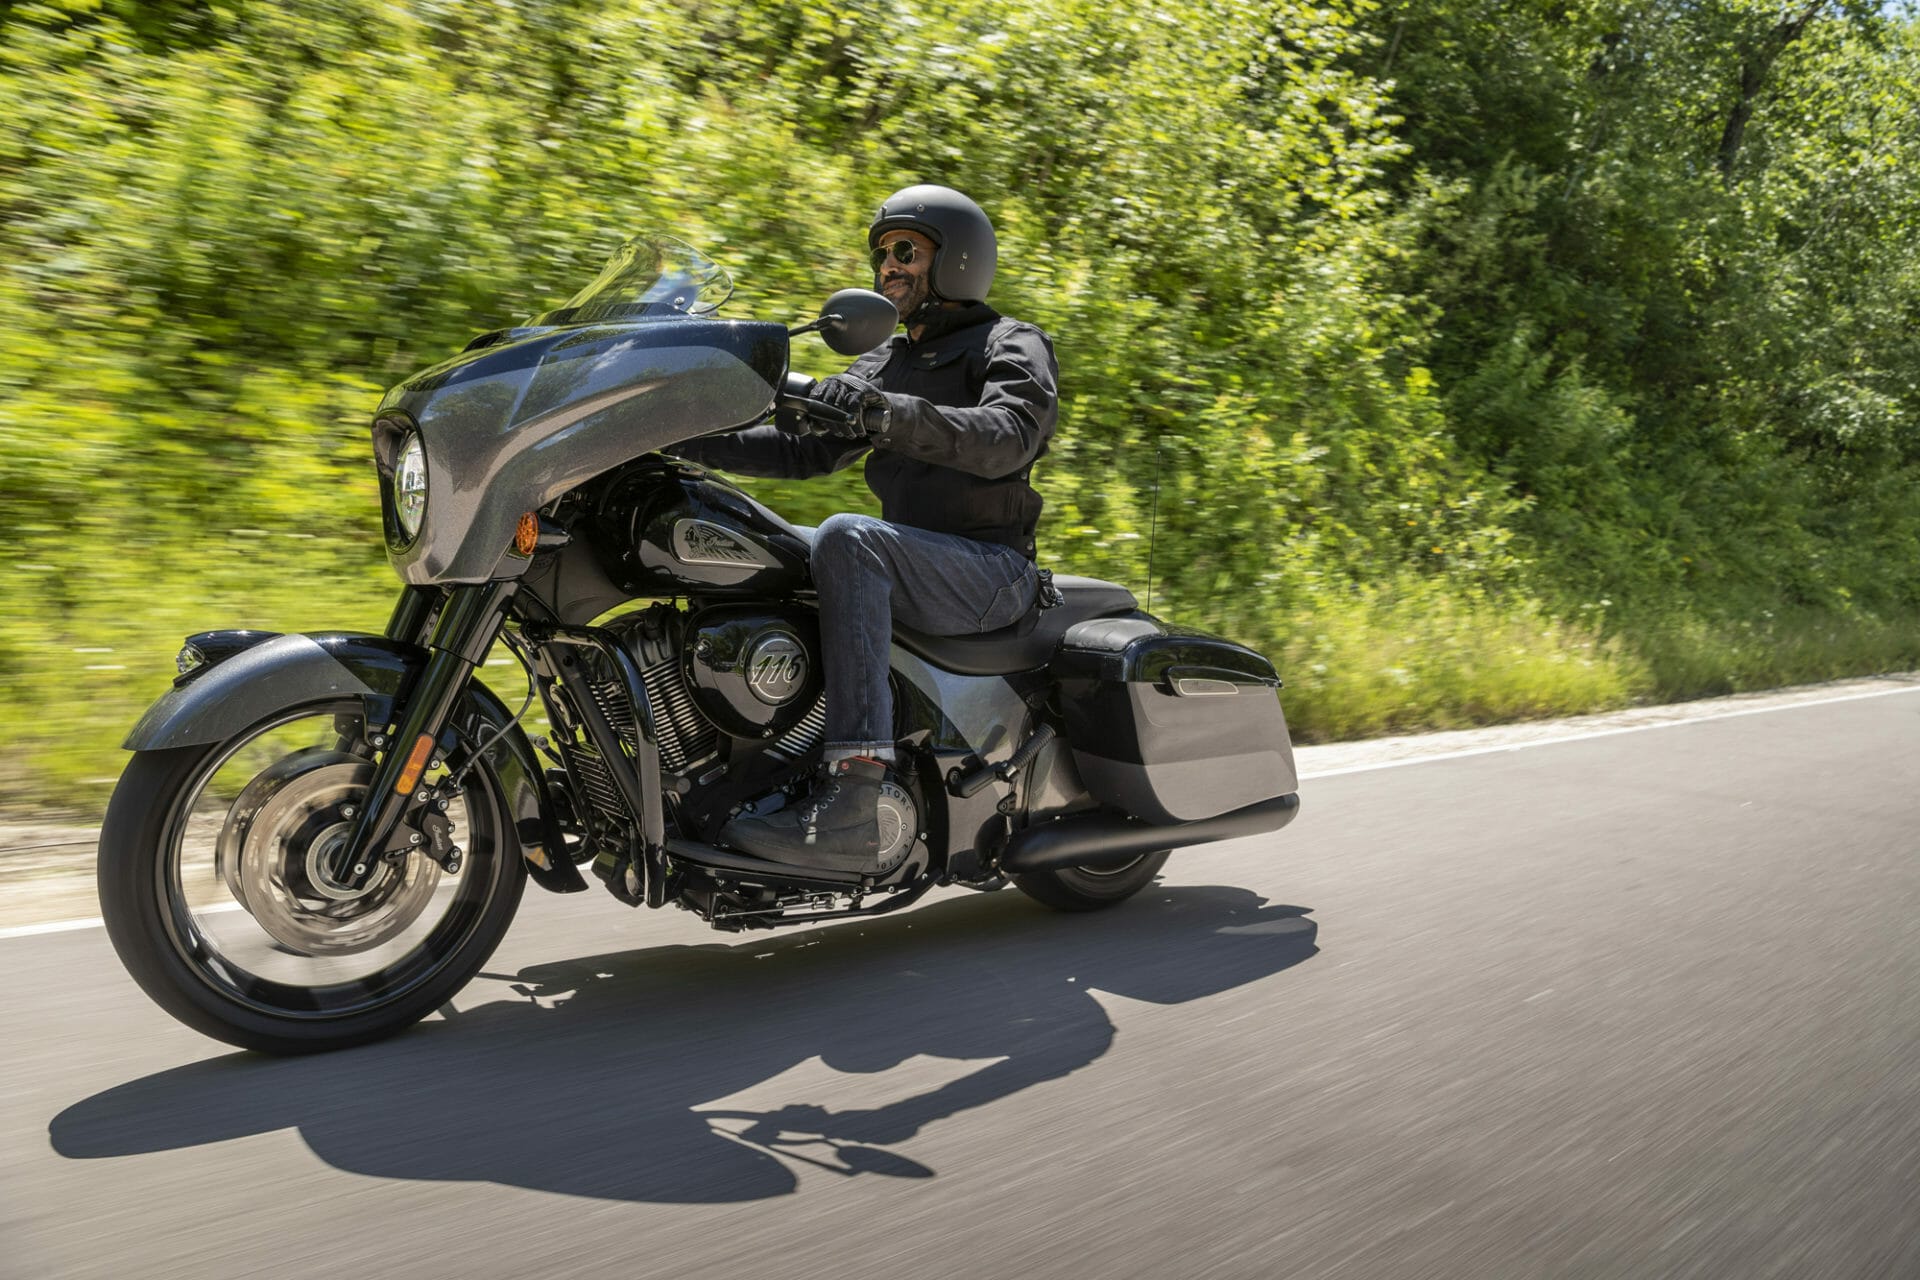 Indian Chieftain Elite 2021 - new and limited edition
- also in the MOTORCYCLES.NEWS APP